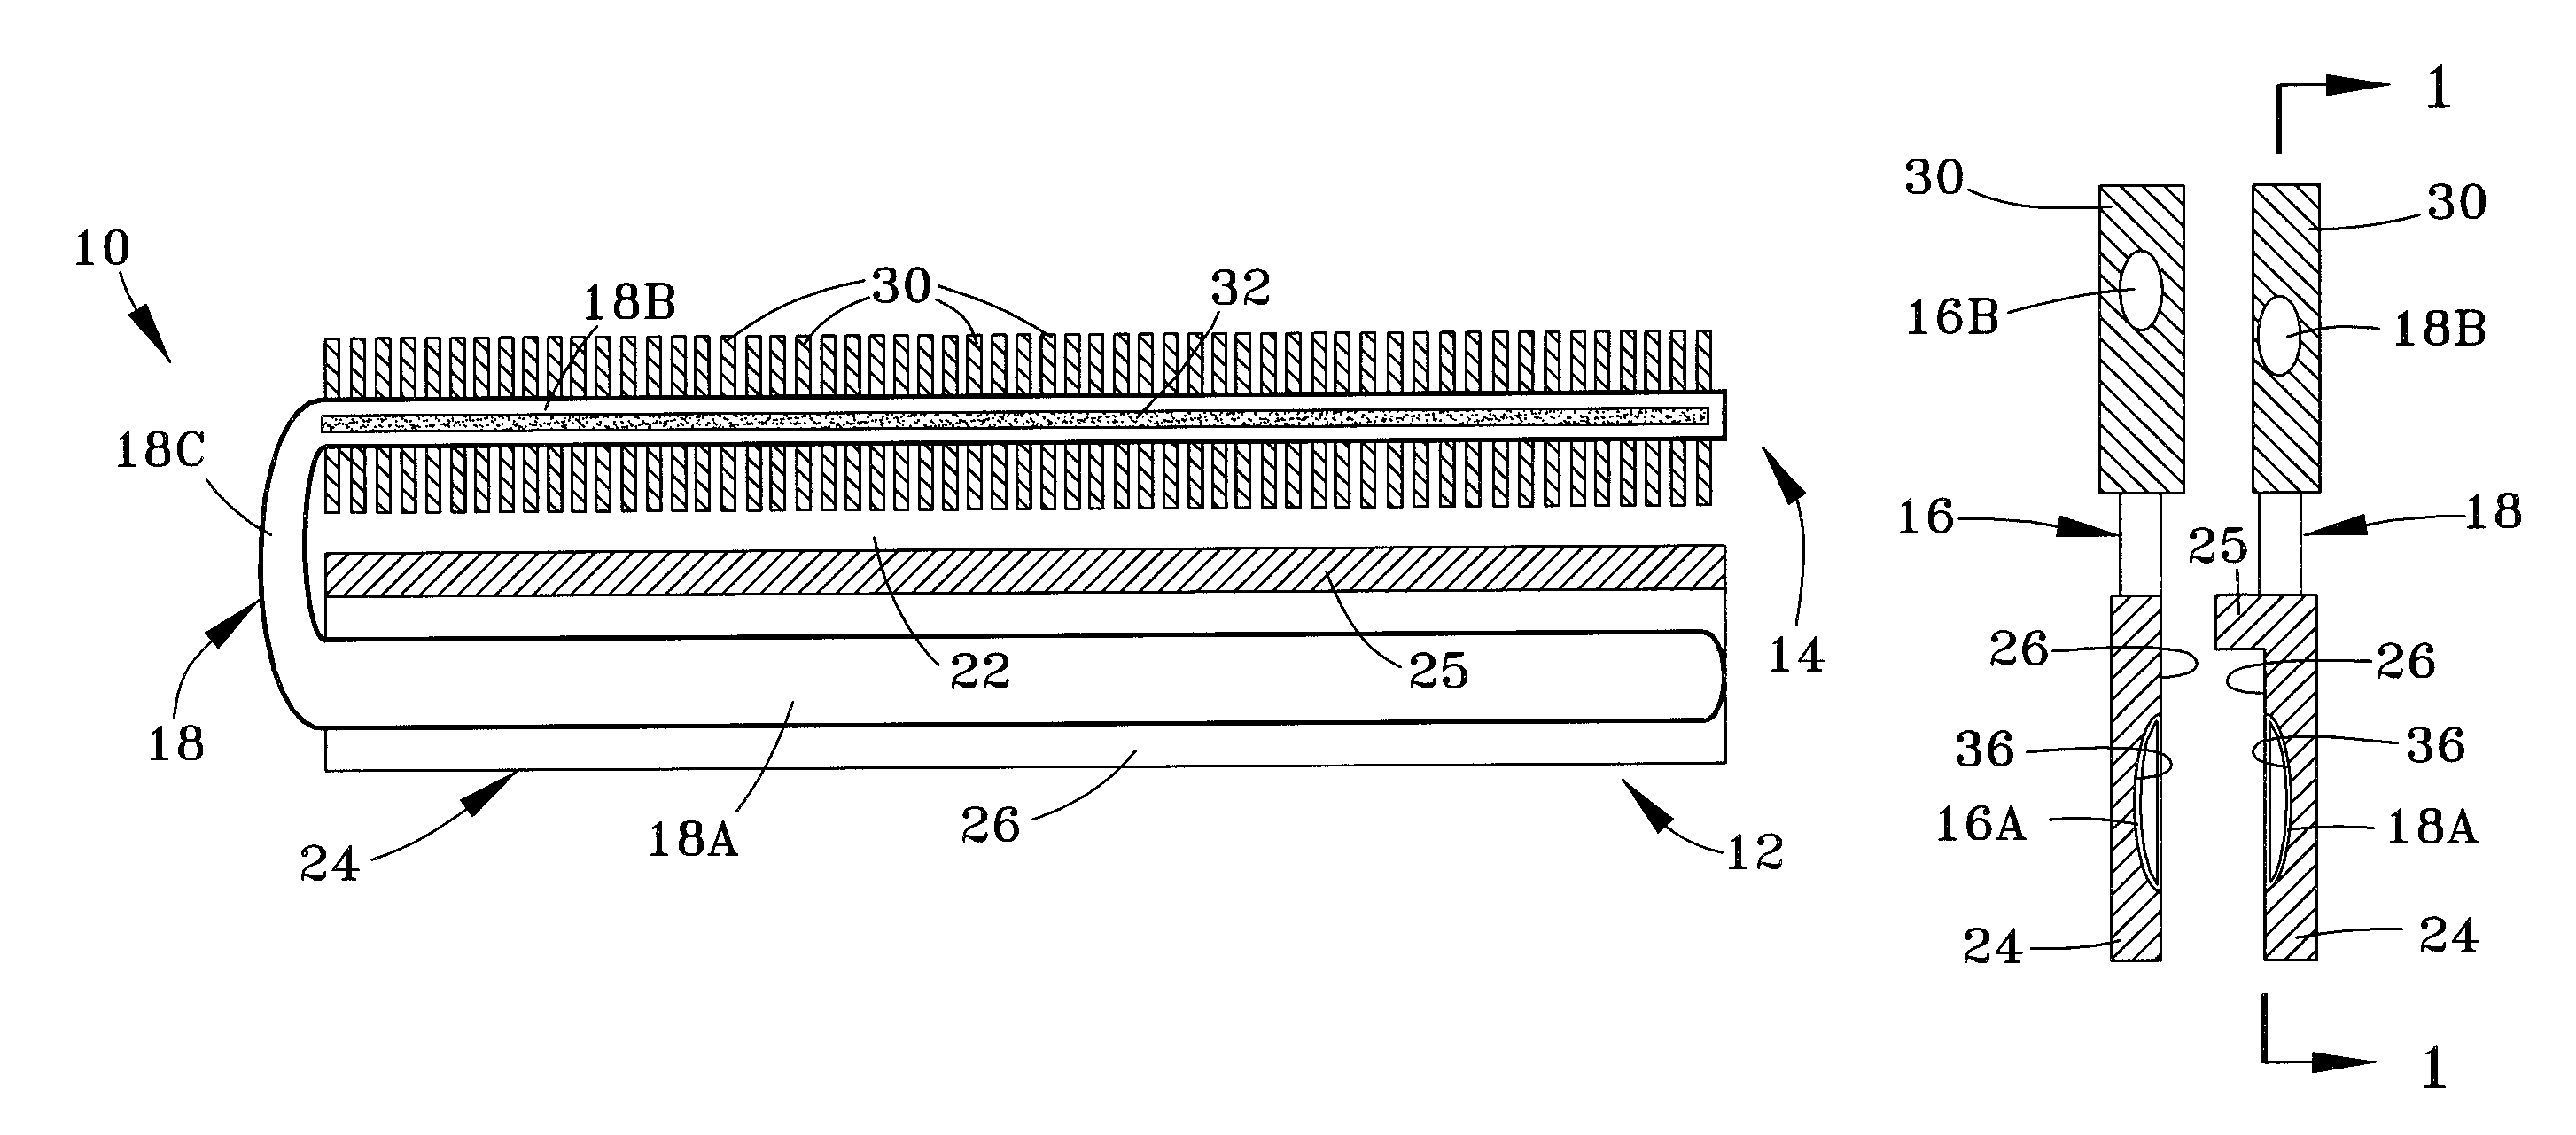 Method and apparatus for cooling computer memory